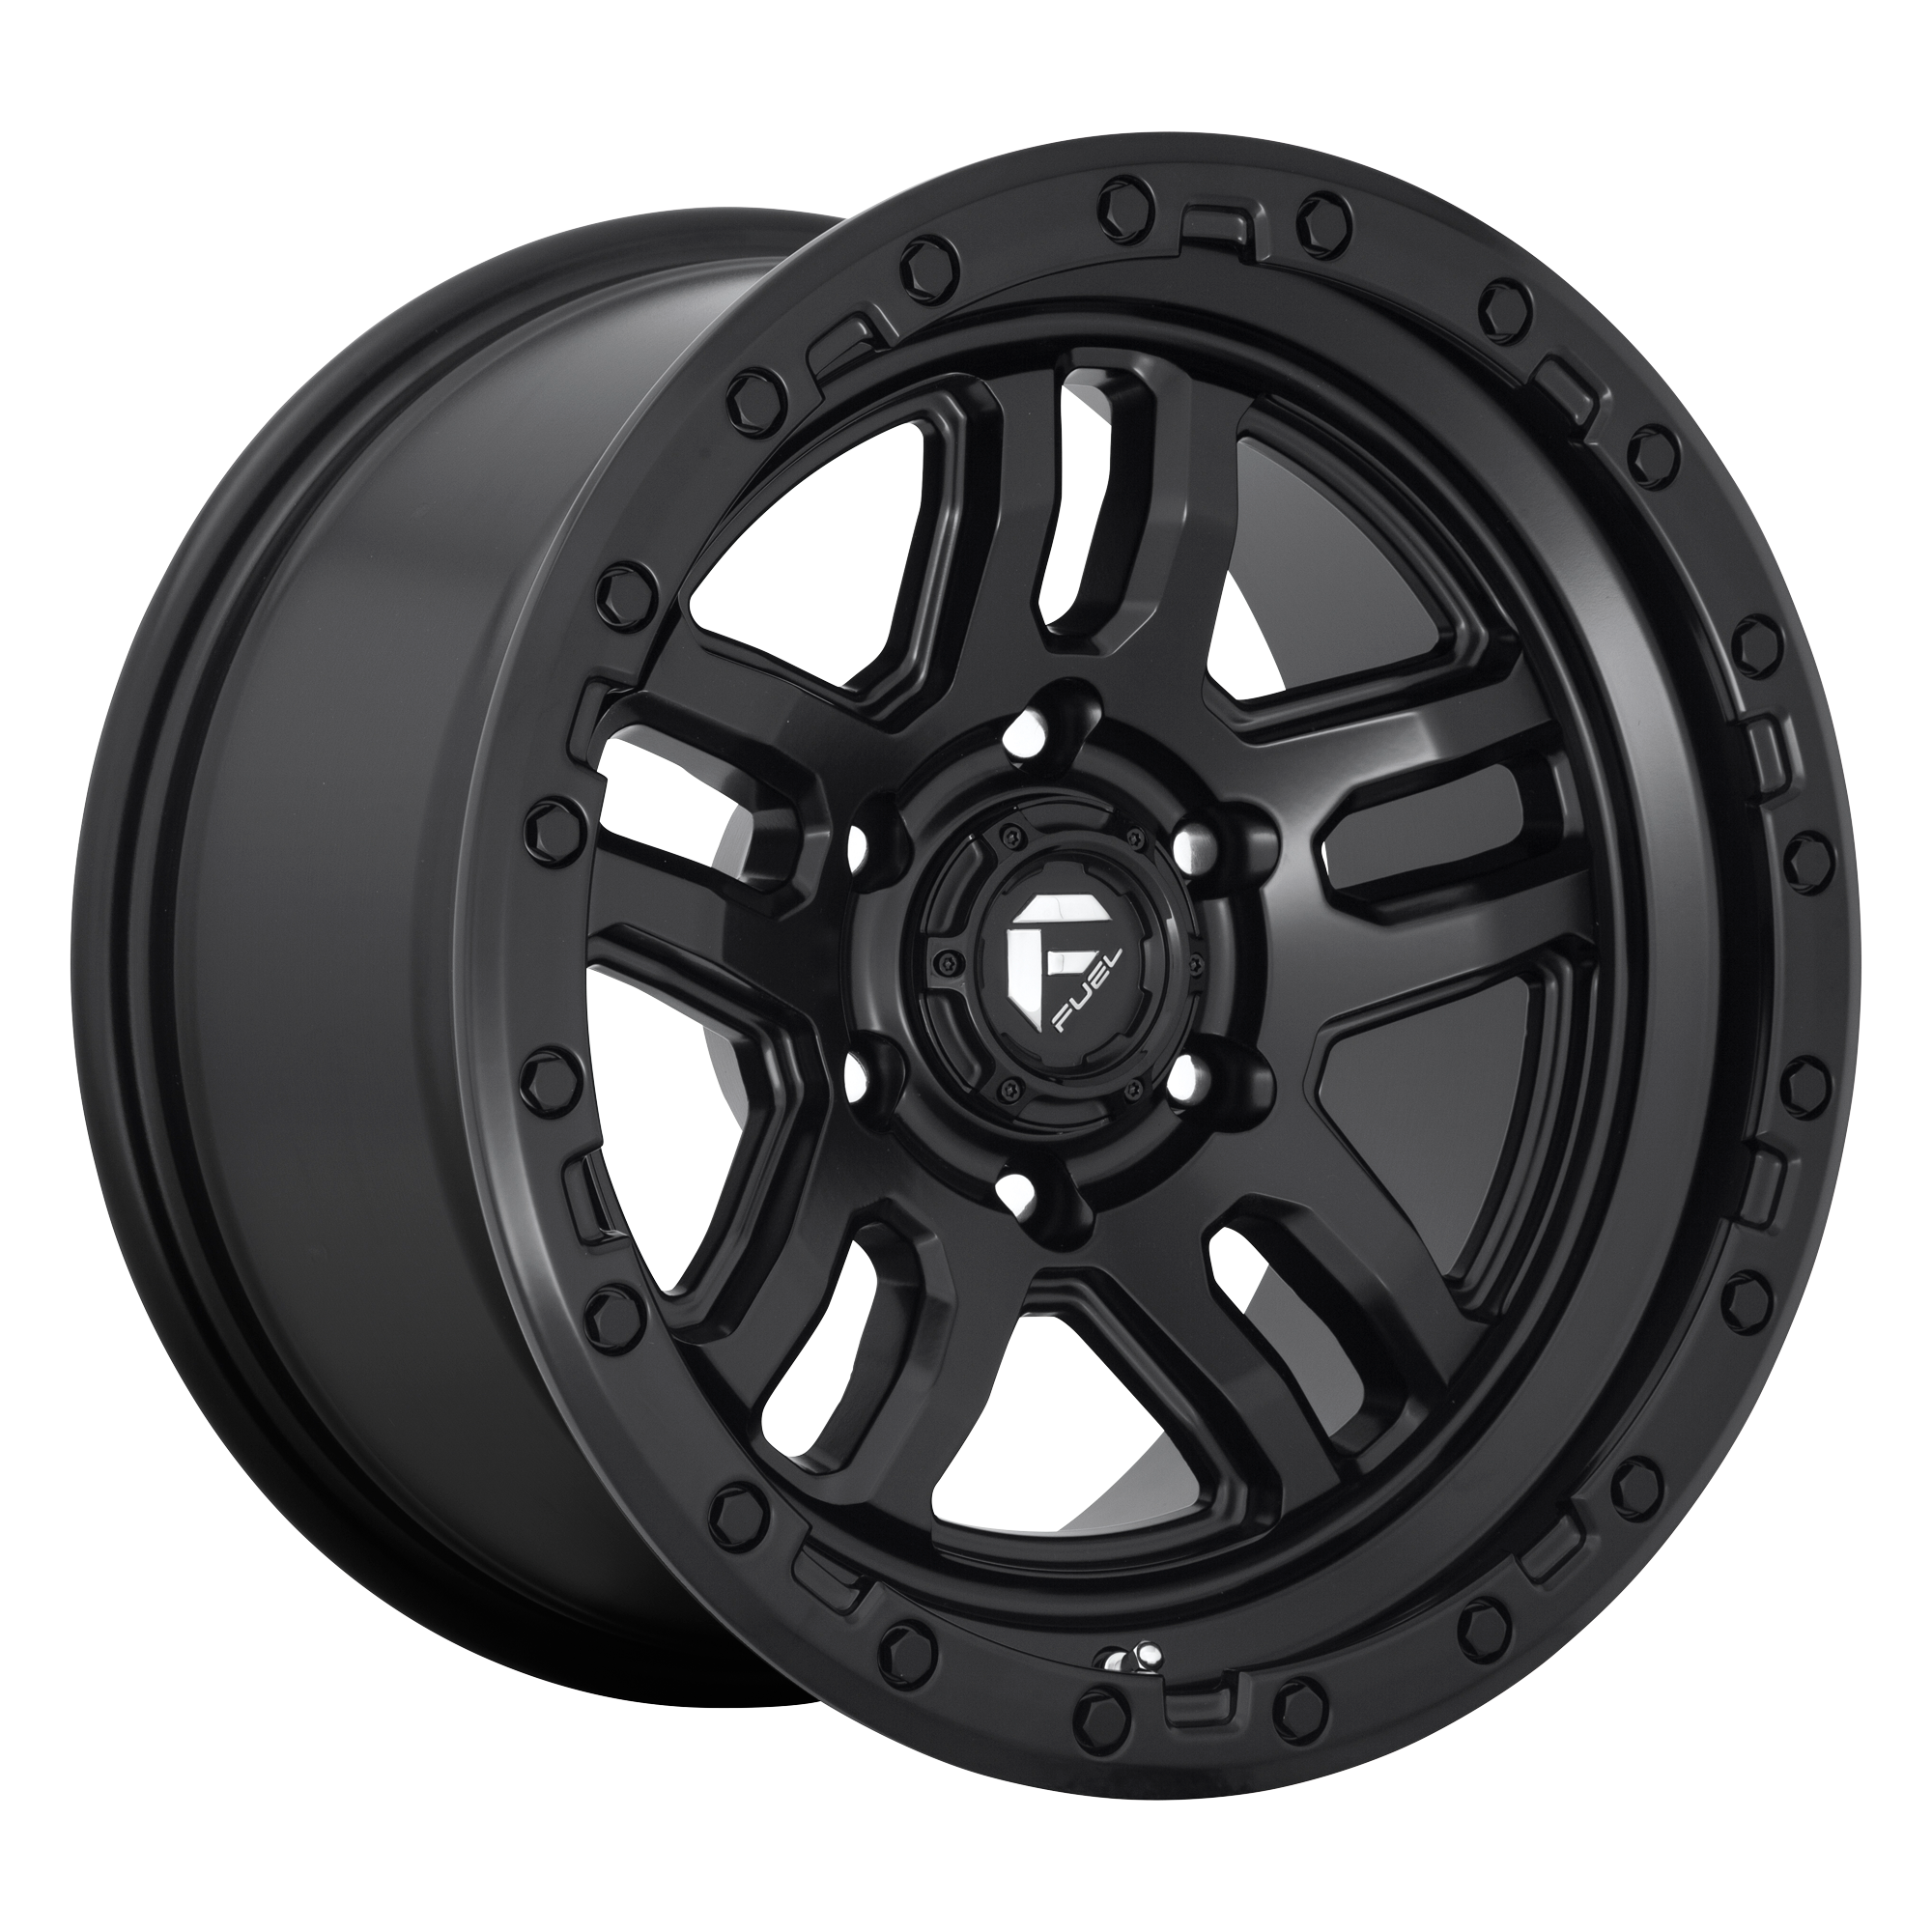 AMMO 17x9 5x127.00 MATTE BLACK (-12 mm) - Tires and Engine Performance